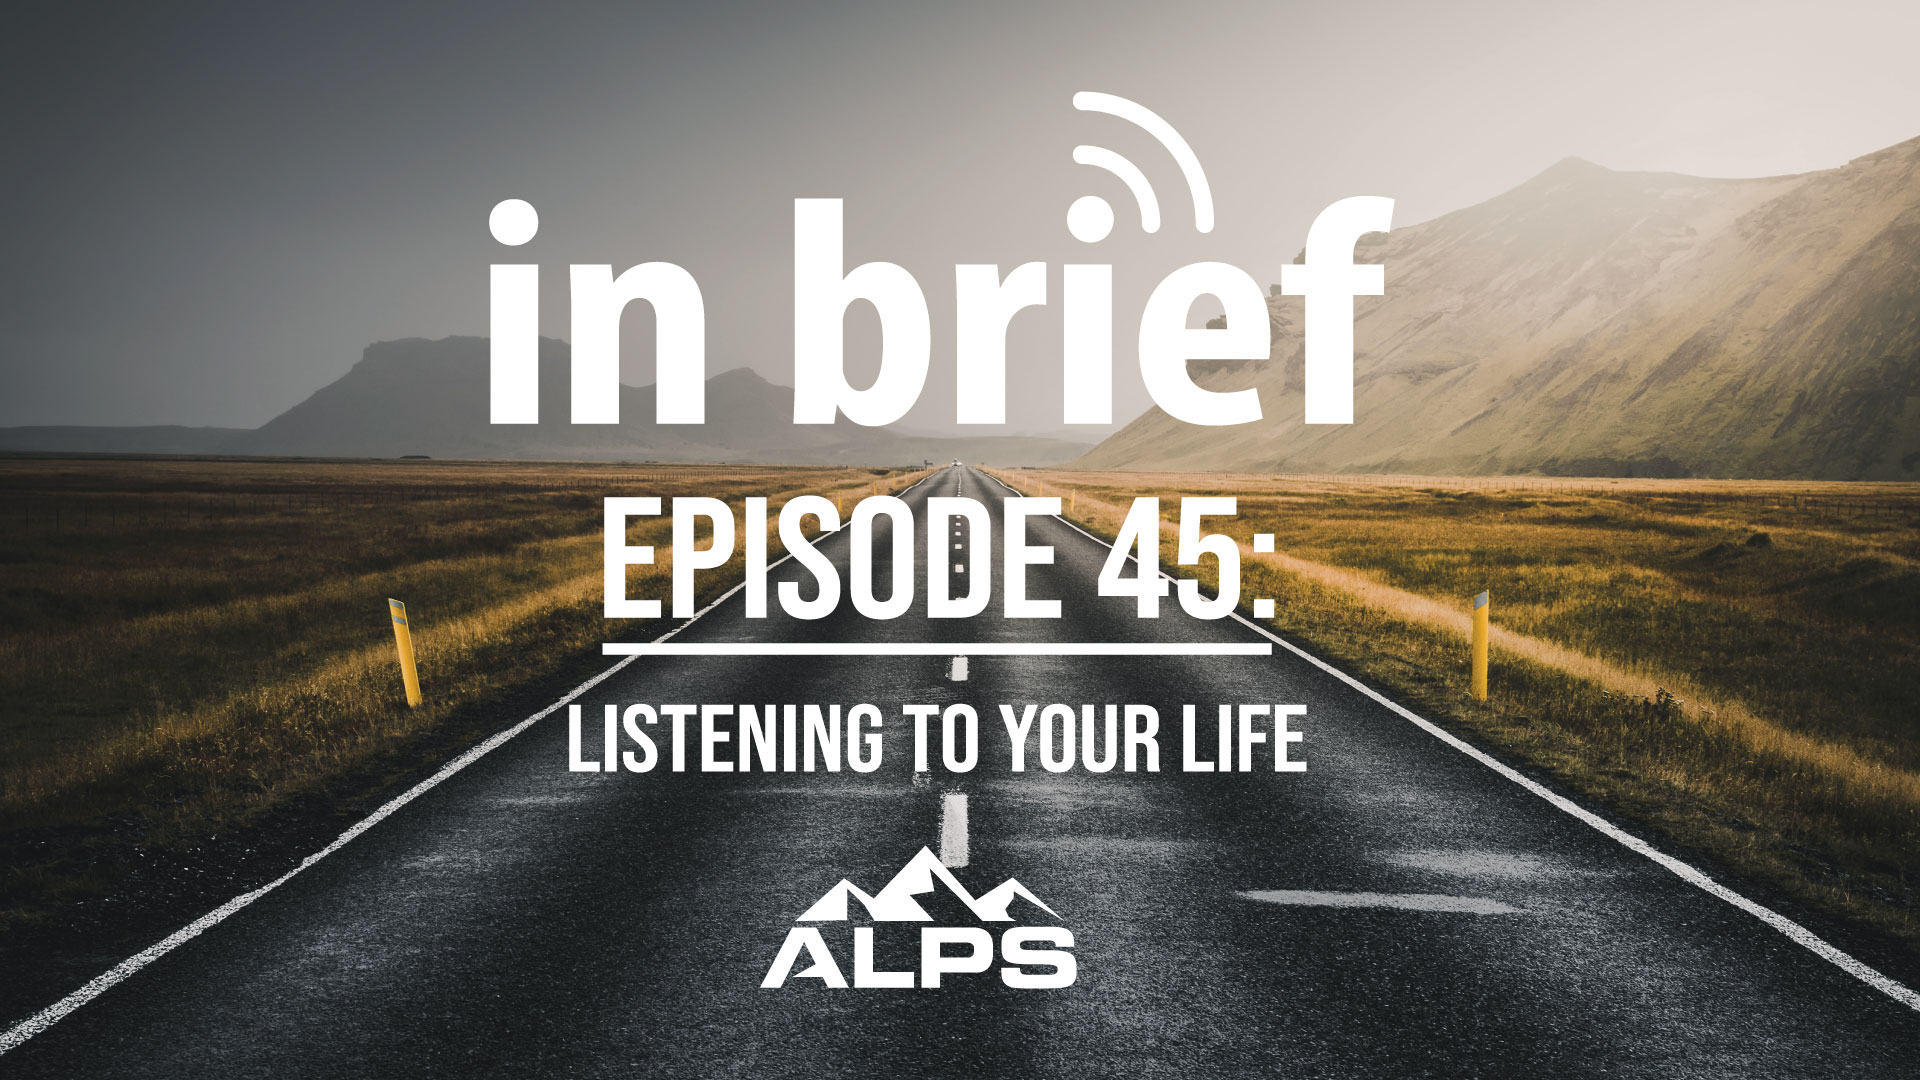 ALPS In Brief — Episode 45: Listening to Your Life